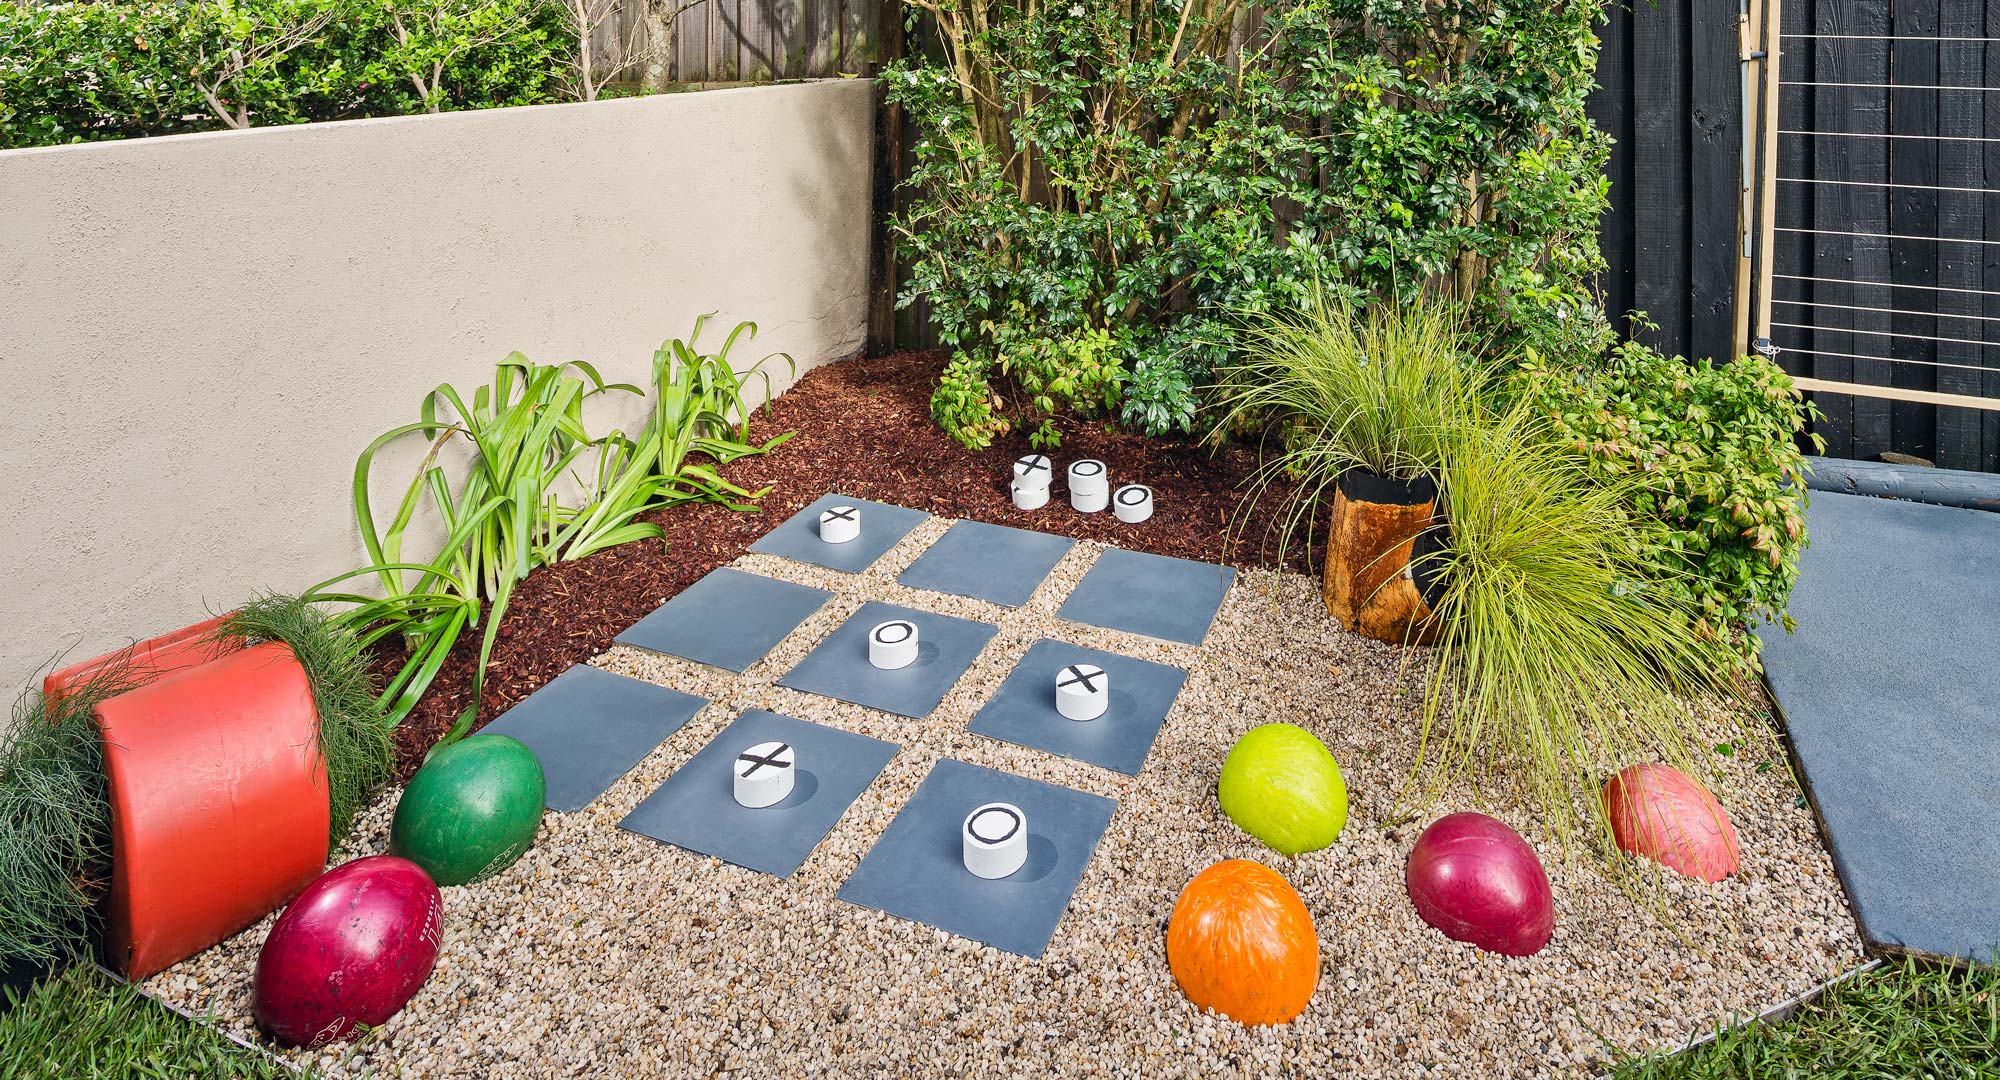 Make your own life-sized noughts & crosses board | Better ...